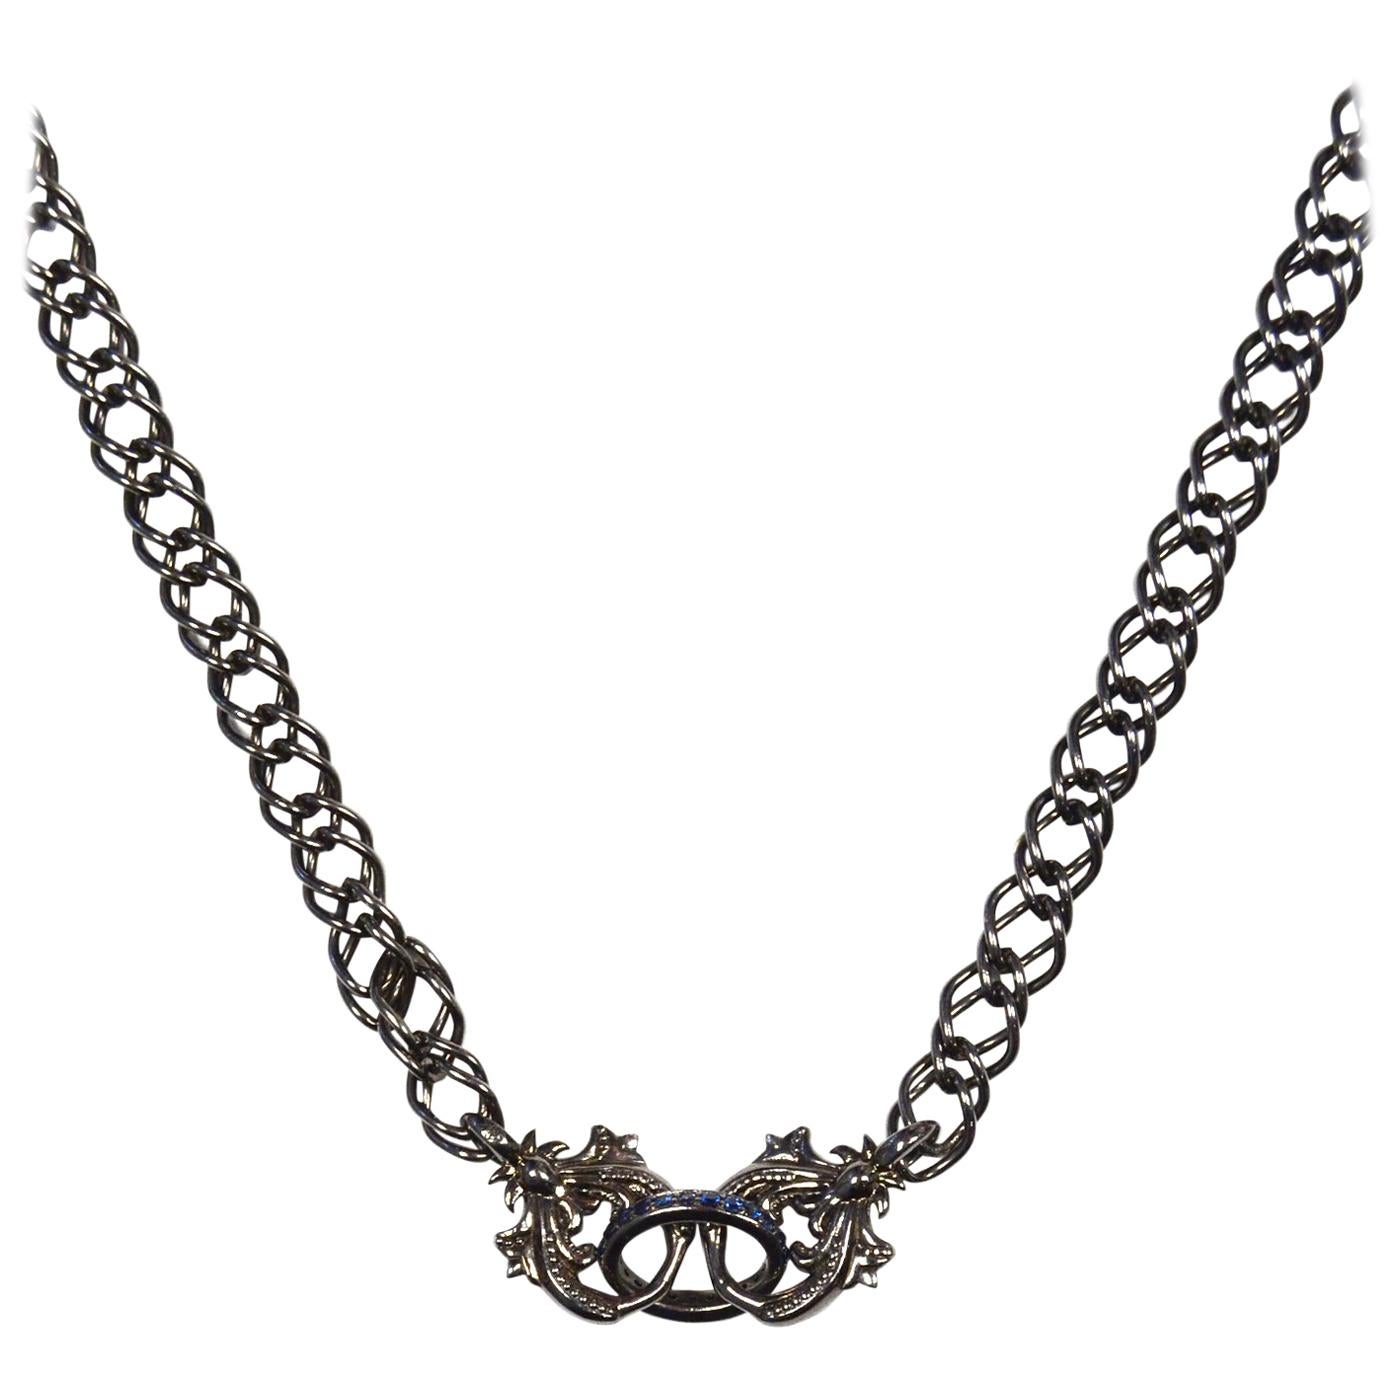 Stephen Webster Oxidized Sterling Silver Chain Link Necklace W/ Blue Sapphires 